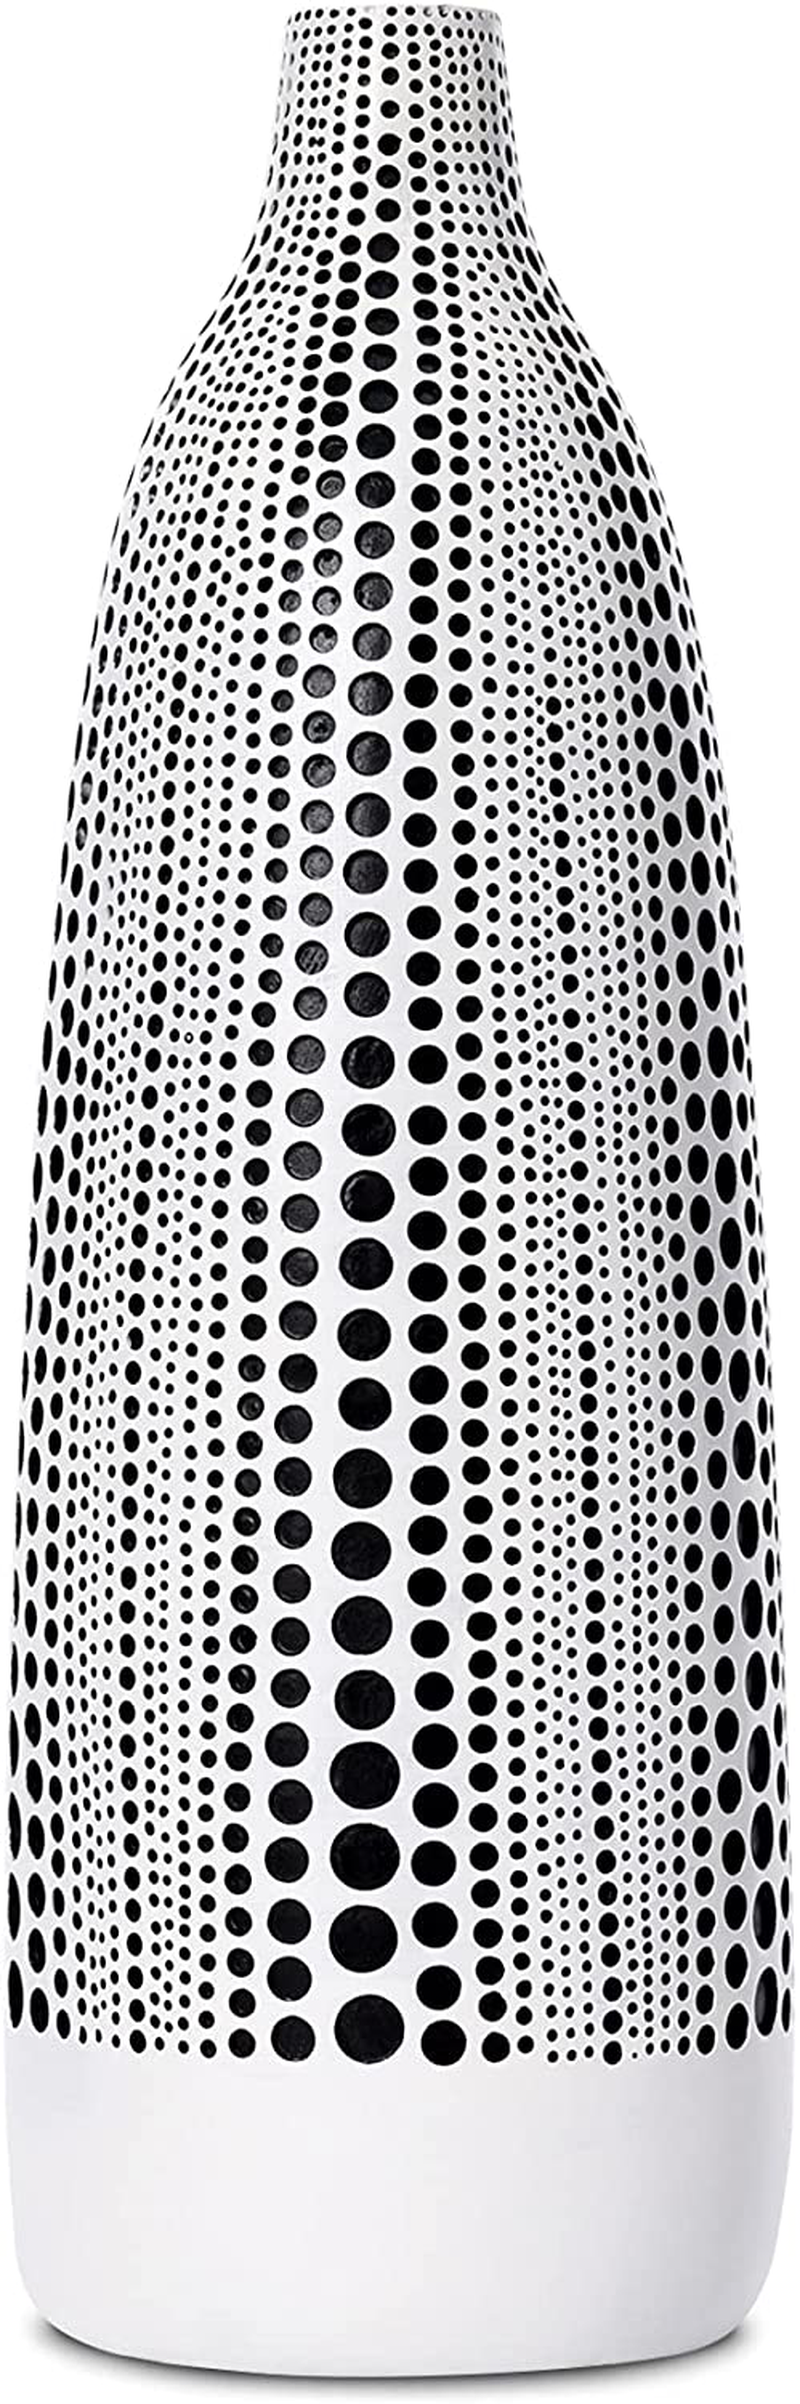 Quoowiit Flower Vase, Decorative Vases Floral Vase for Centerpieces, Vase for Home Decor, Living Room, Office Table or Wedding, Modern Resin Vases with Black and White Dots-White Tall Home & Garden > Decor > Vases Quoowiit White-tall  